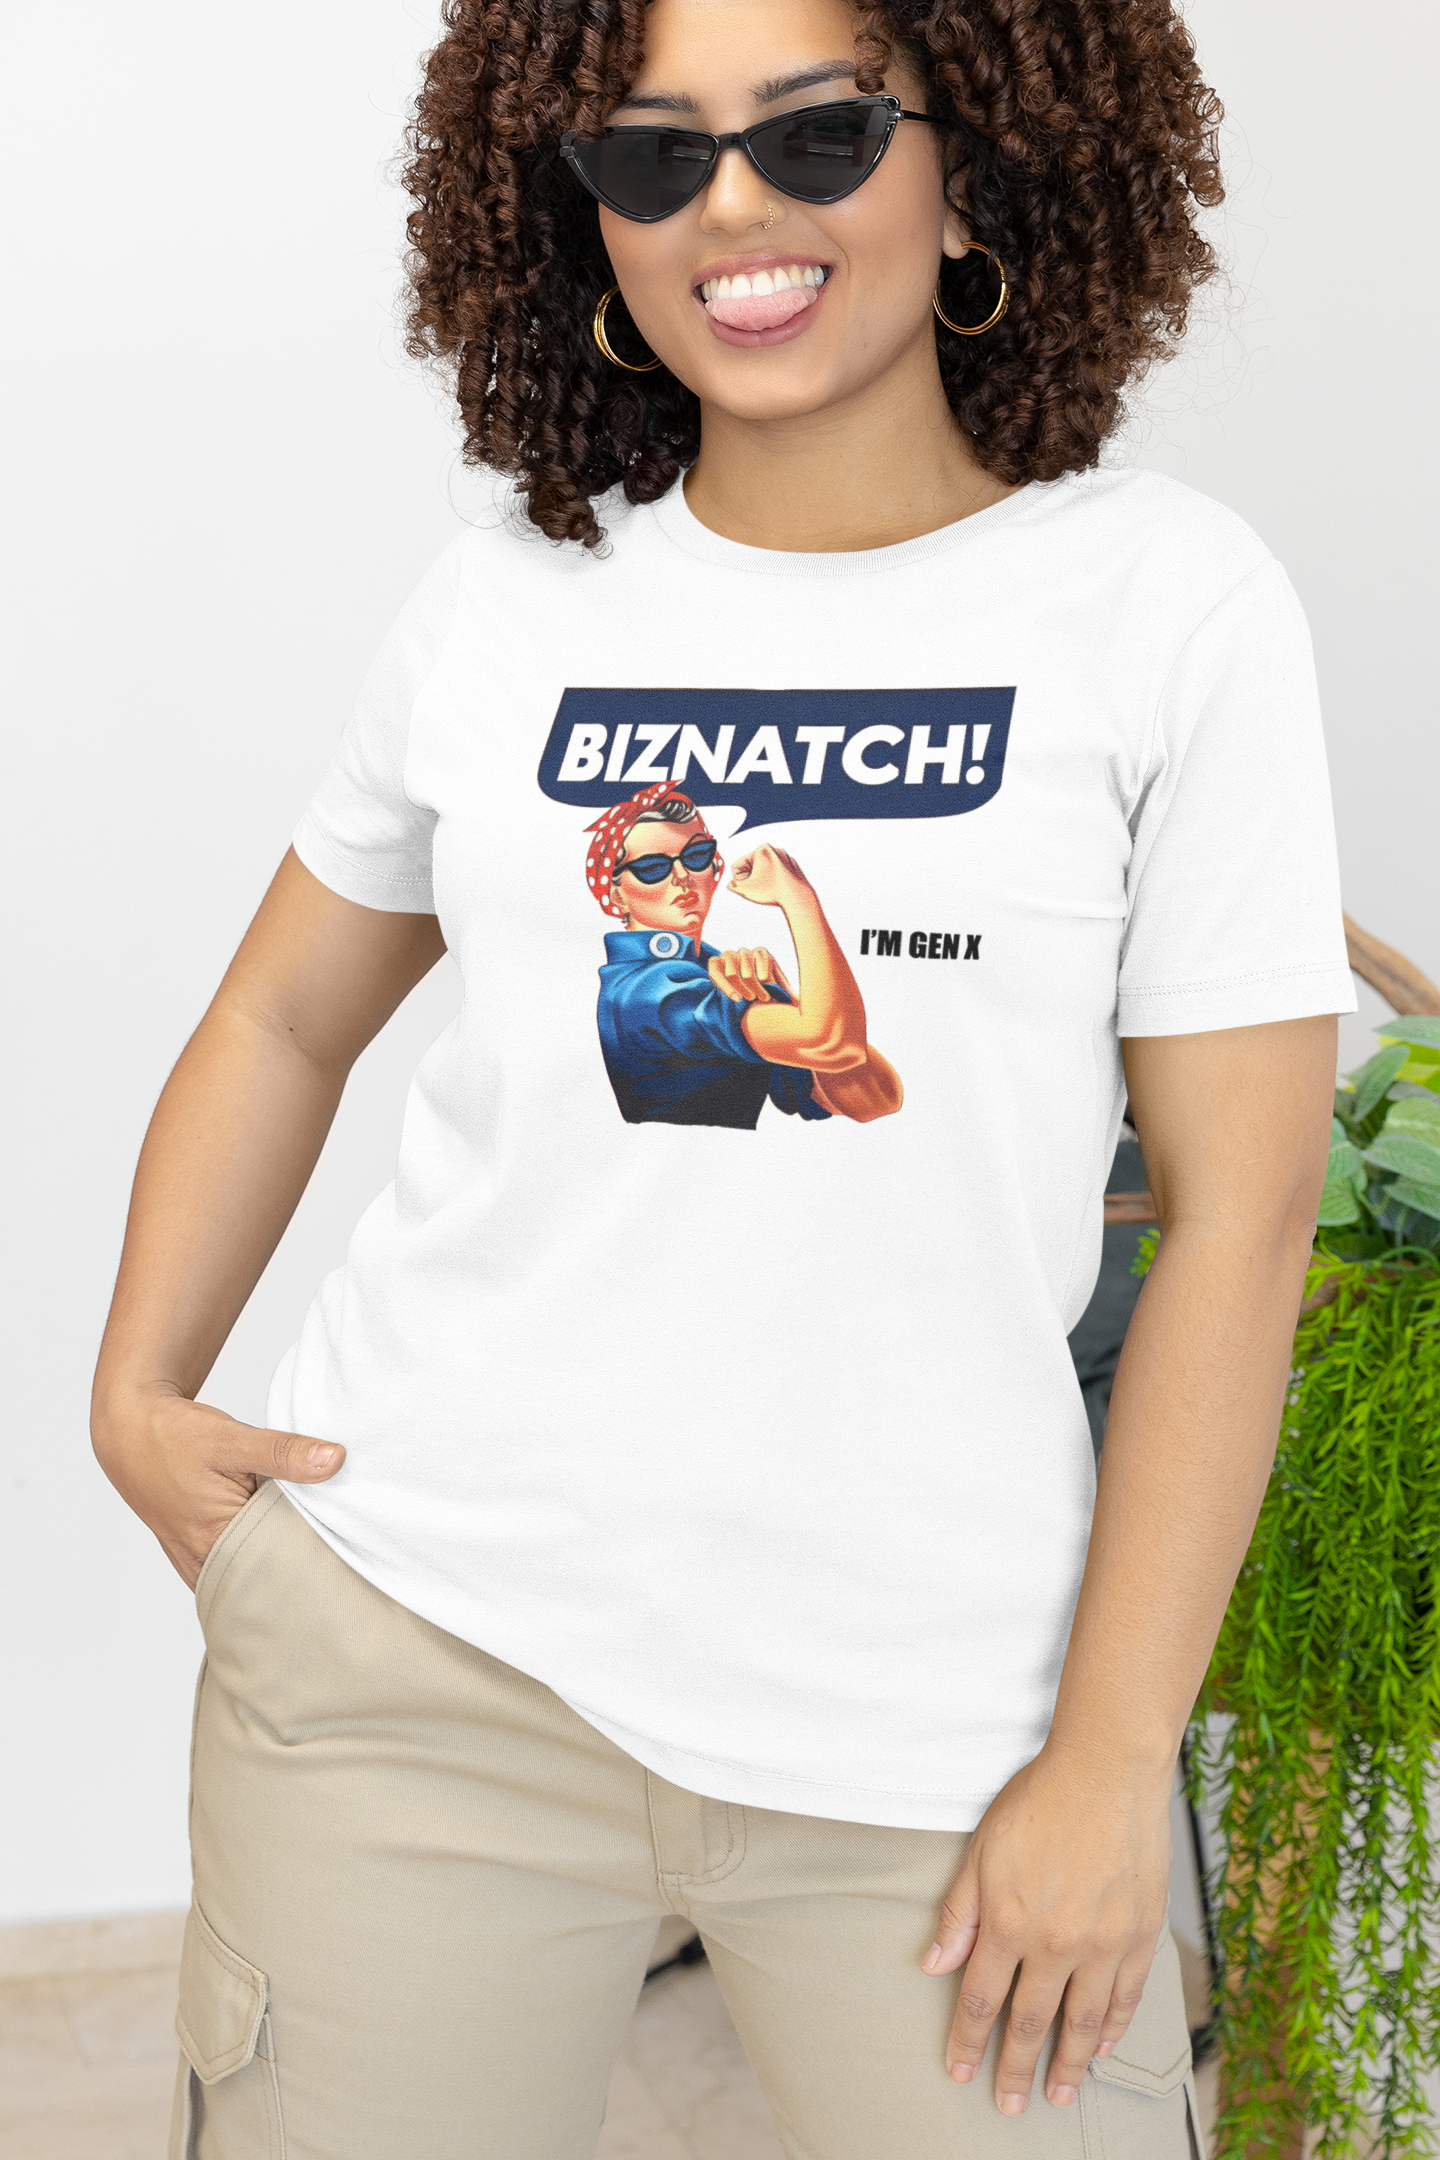 Curly haired woman wearing sun glasses, sticking her tounge out, wearing the Rosie the Riveter sytled T-Shirt that states "Biznatch! I'm Gen X".